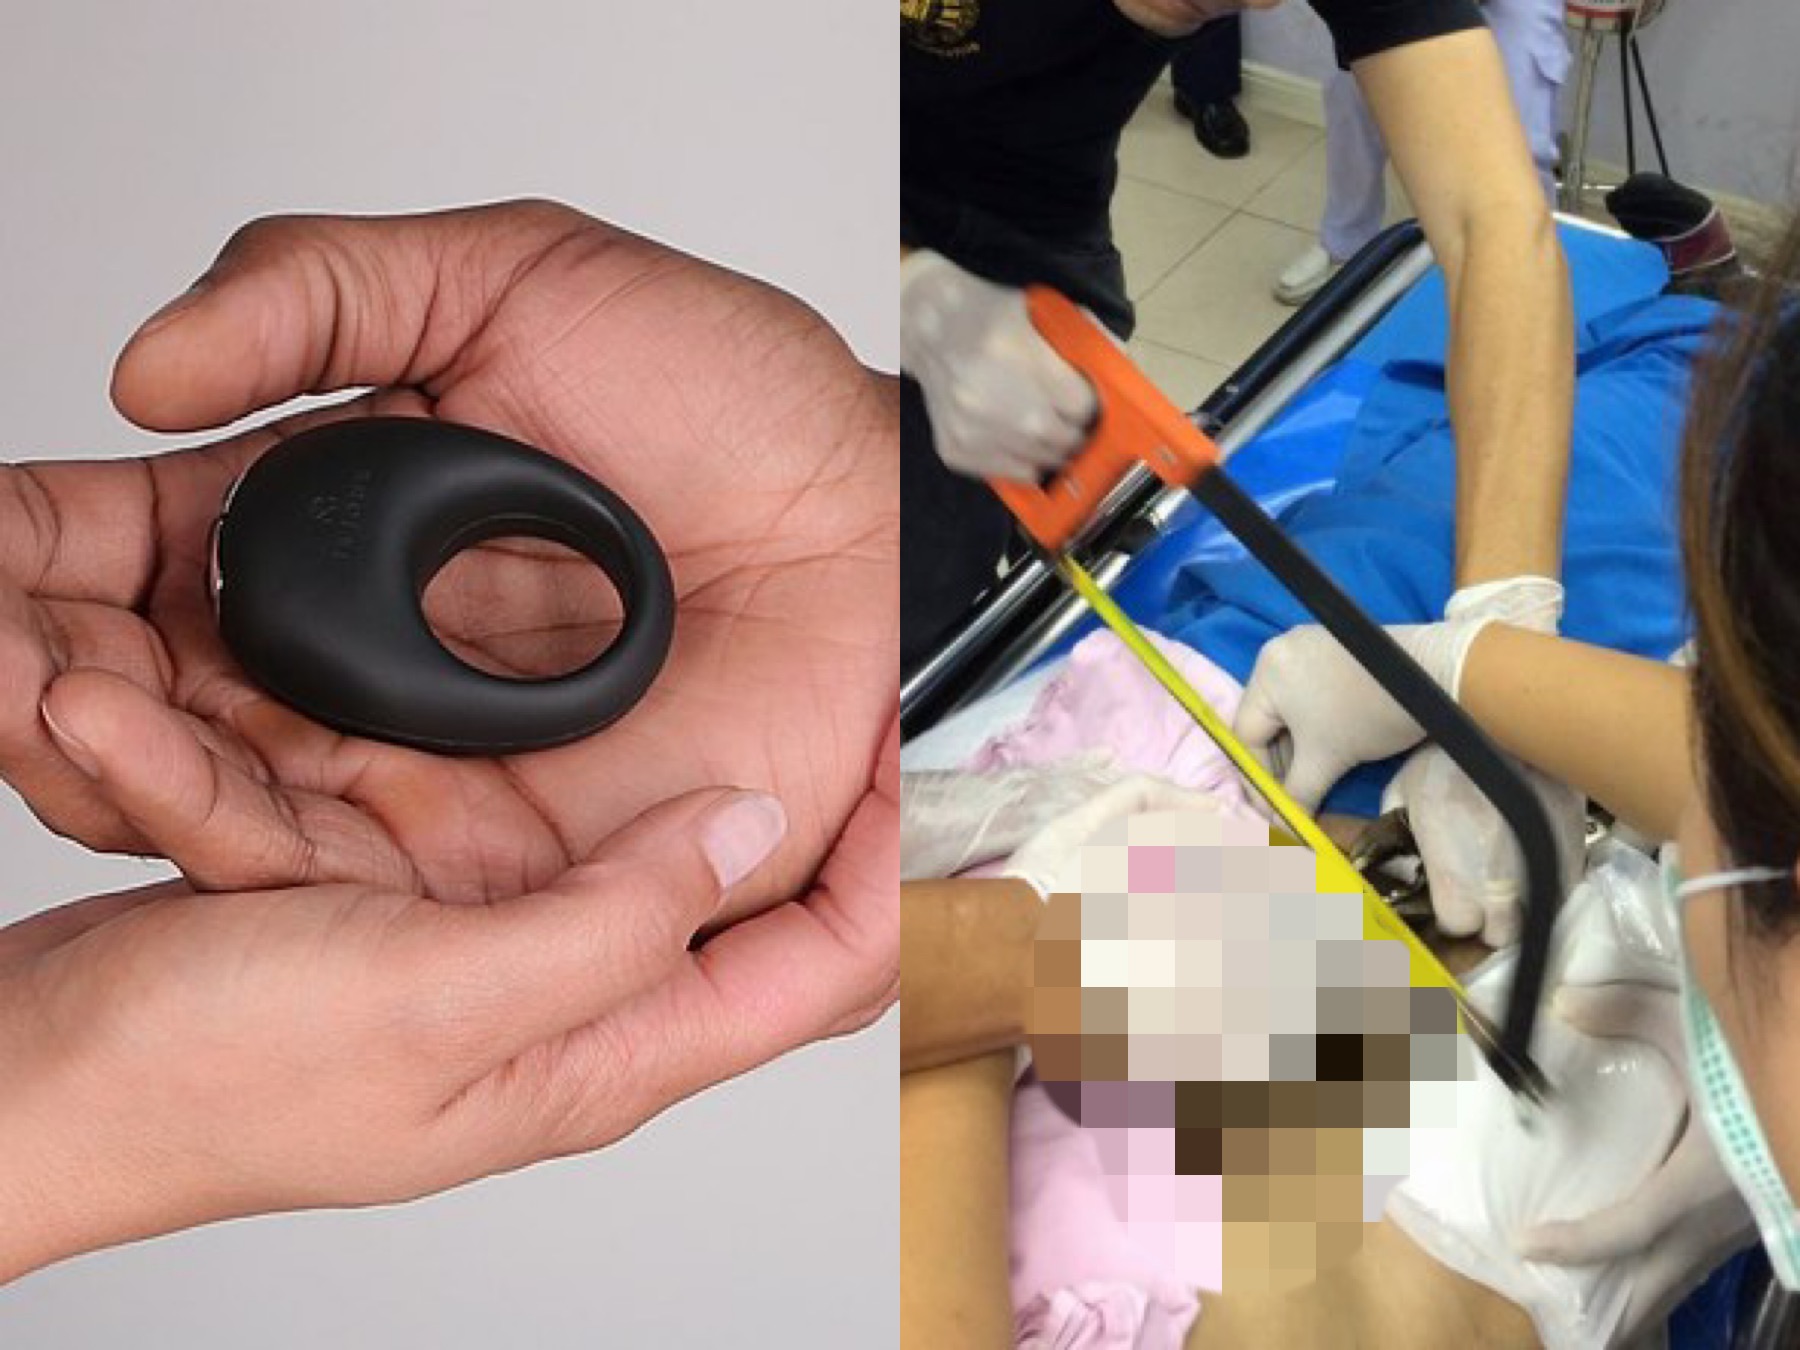 Skygge jeg læser en bog Have en picnic Why Are There So Many Penis Ring Accidents In M'sia? Here Are 3 Tragically  Gruesome Stories…